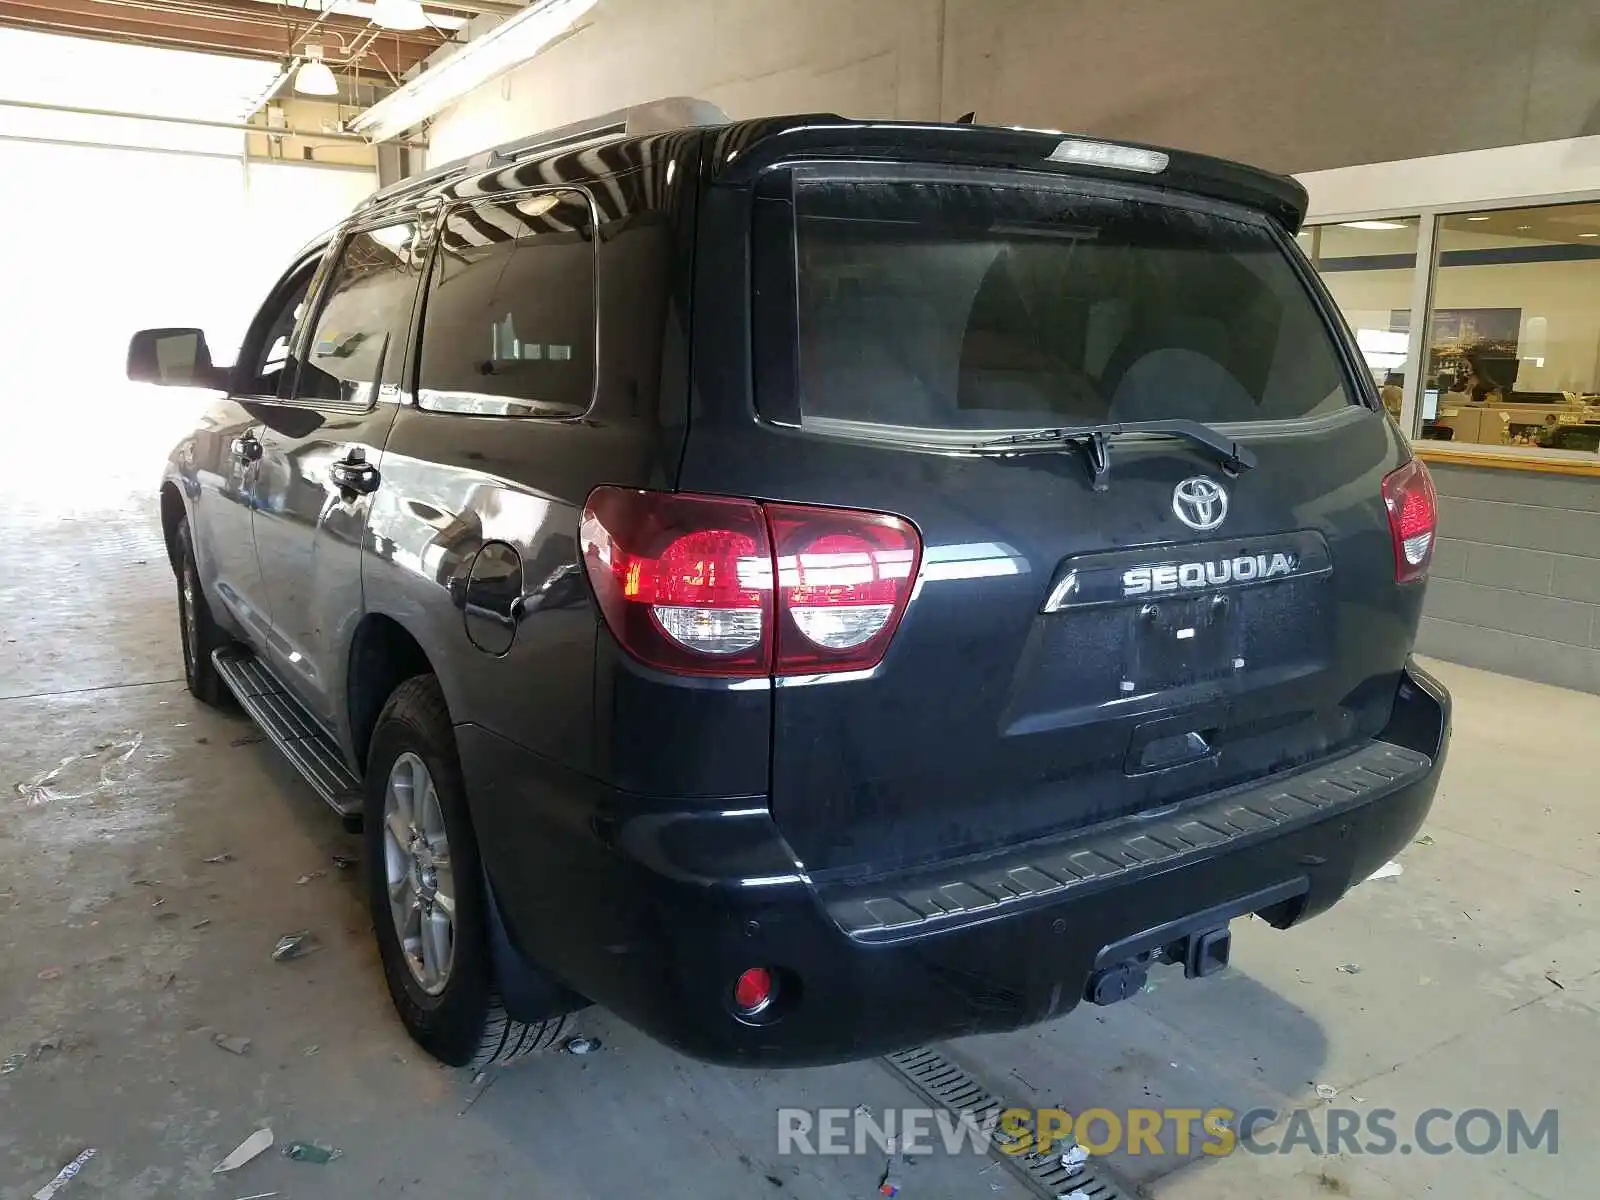 3 Photograph of a damaged car 5TDBY5G11KS170381 TOYOTA SEQUOIA 2019